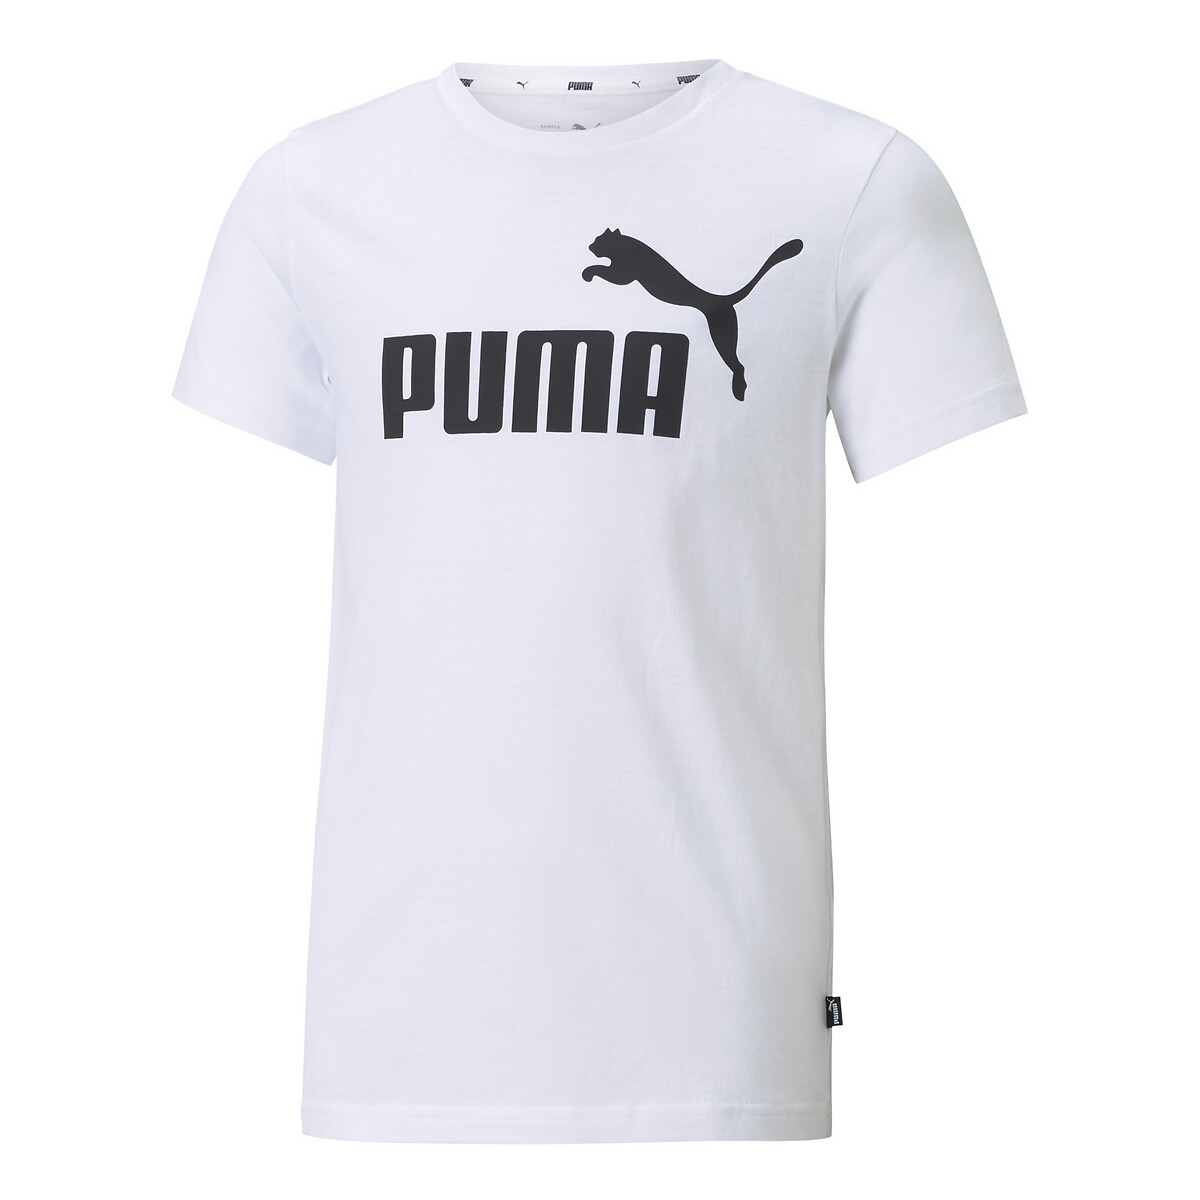 Image of Logo Print Cotton T-Shirt with Short Sleeves, 8-16 Years